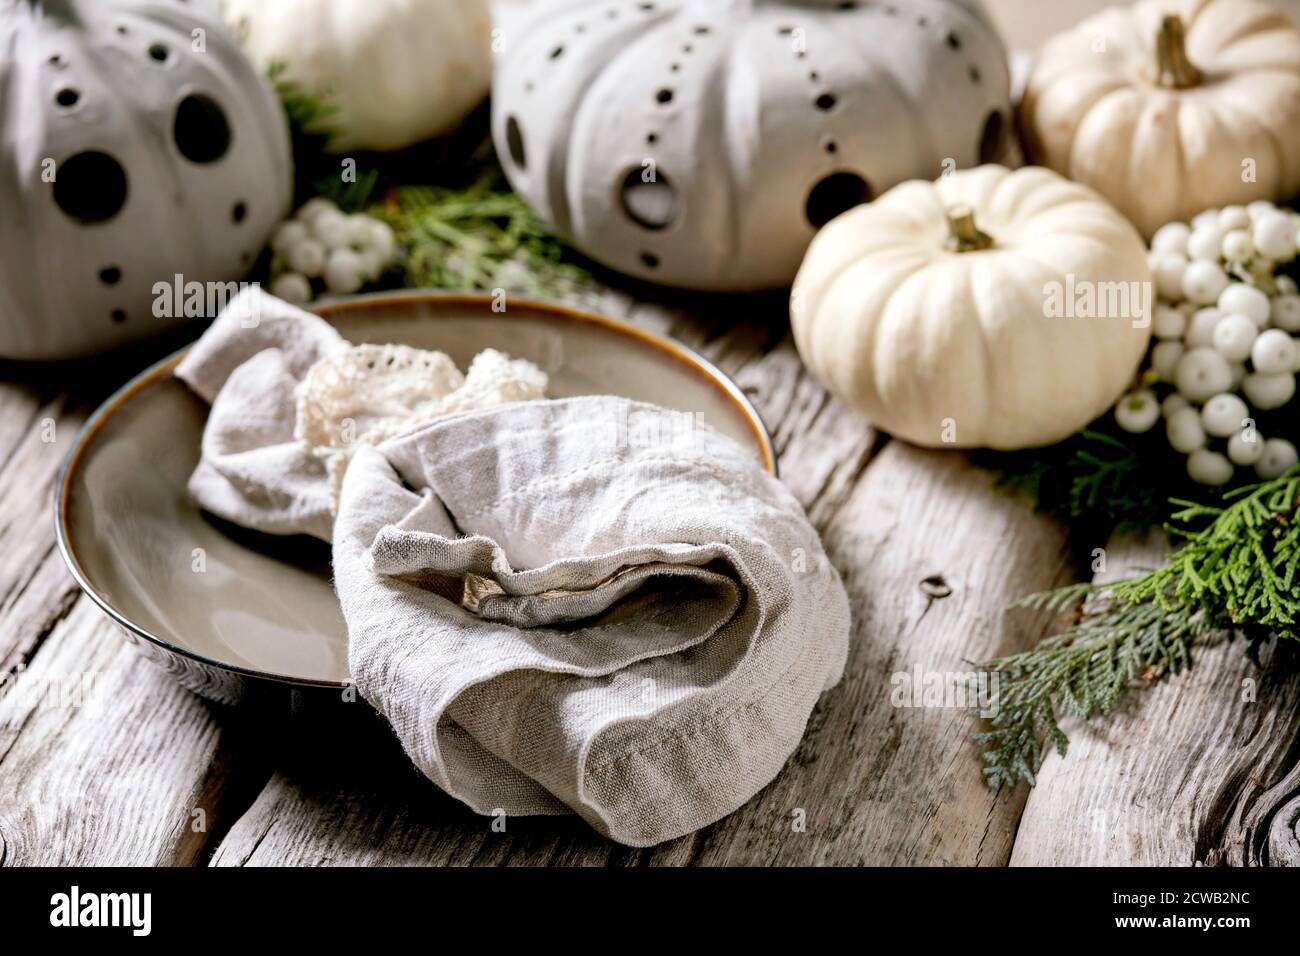 Holiday table setting decoration with white decorative pumpkins, craft clay pumpkins, thuja branches, empty plate with cloth napkin over old wooden ta Stock Photo